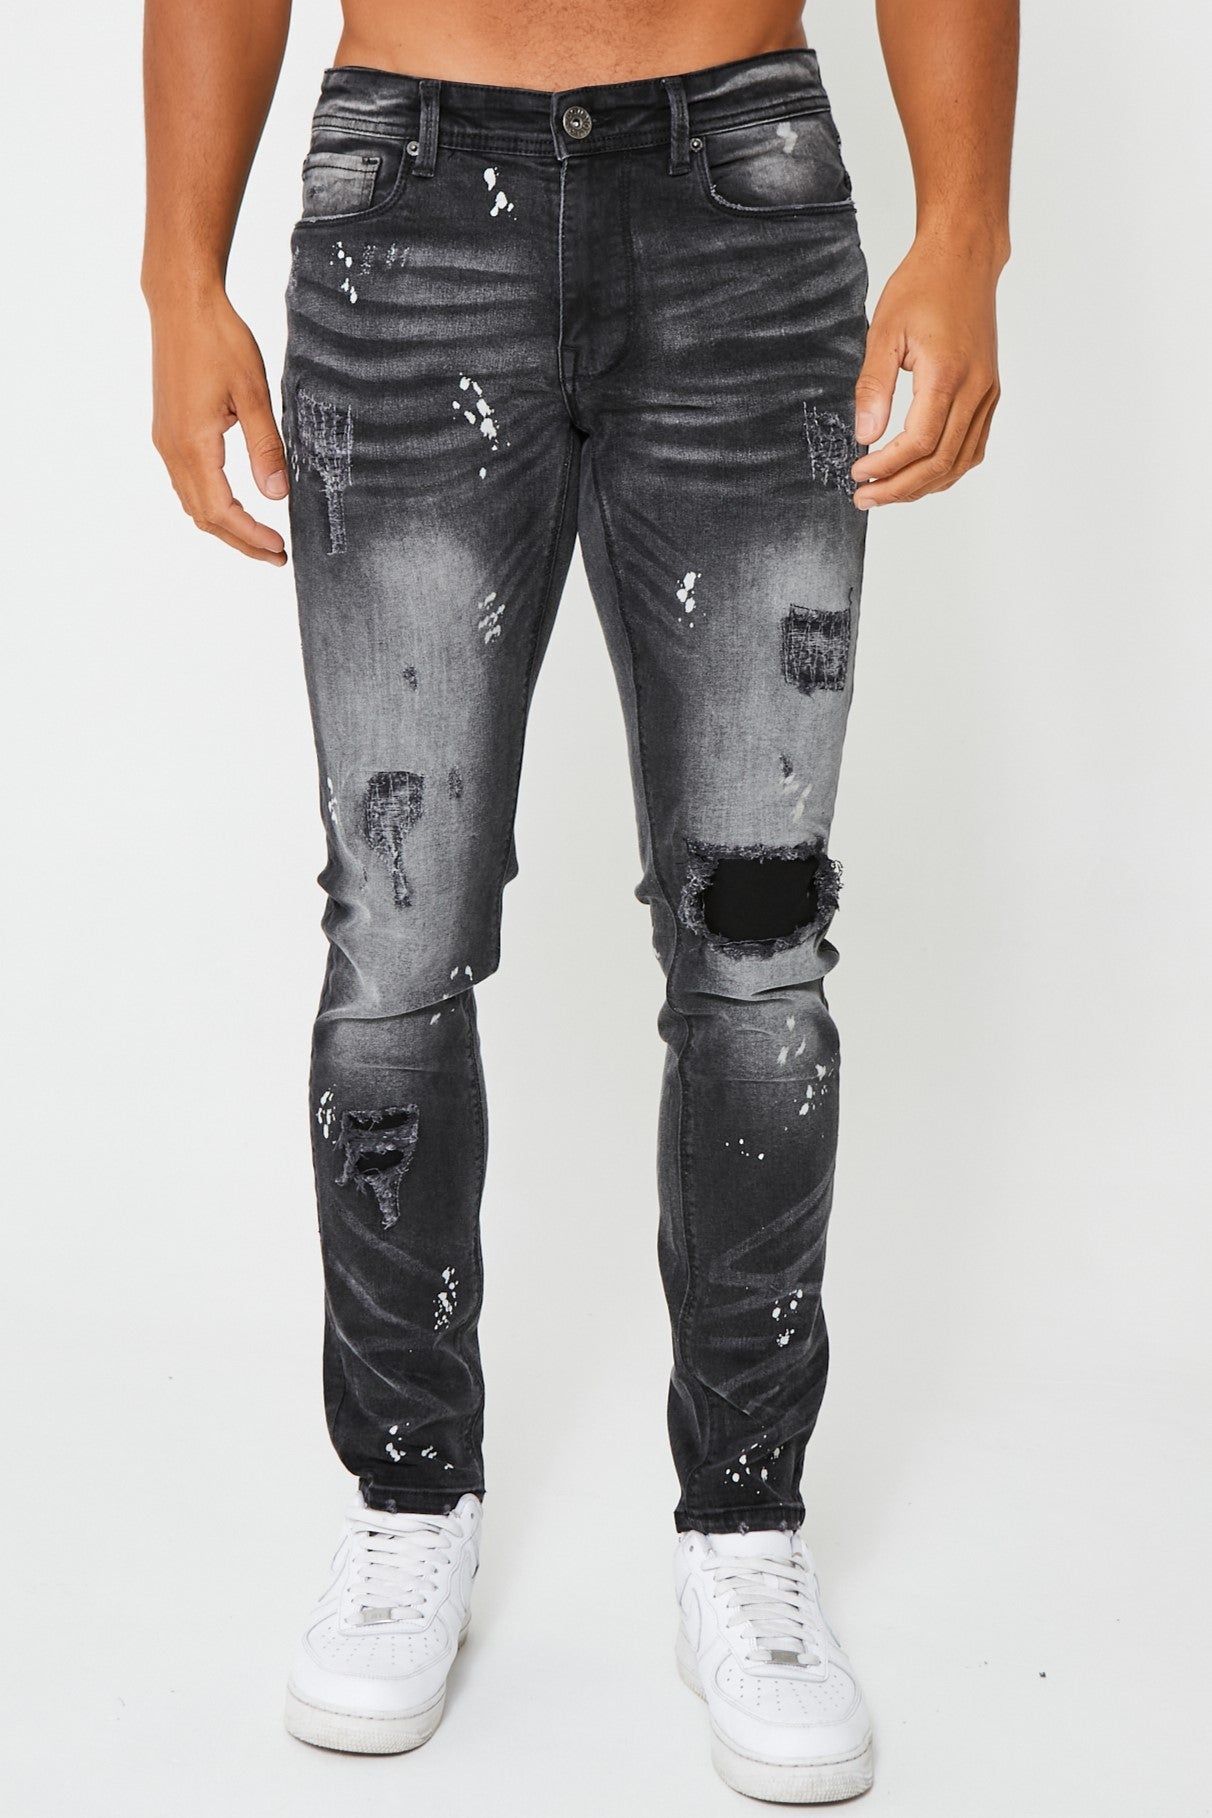 Harrow Tapered Jeans - Black product